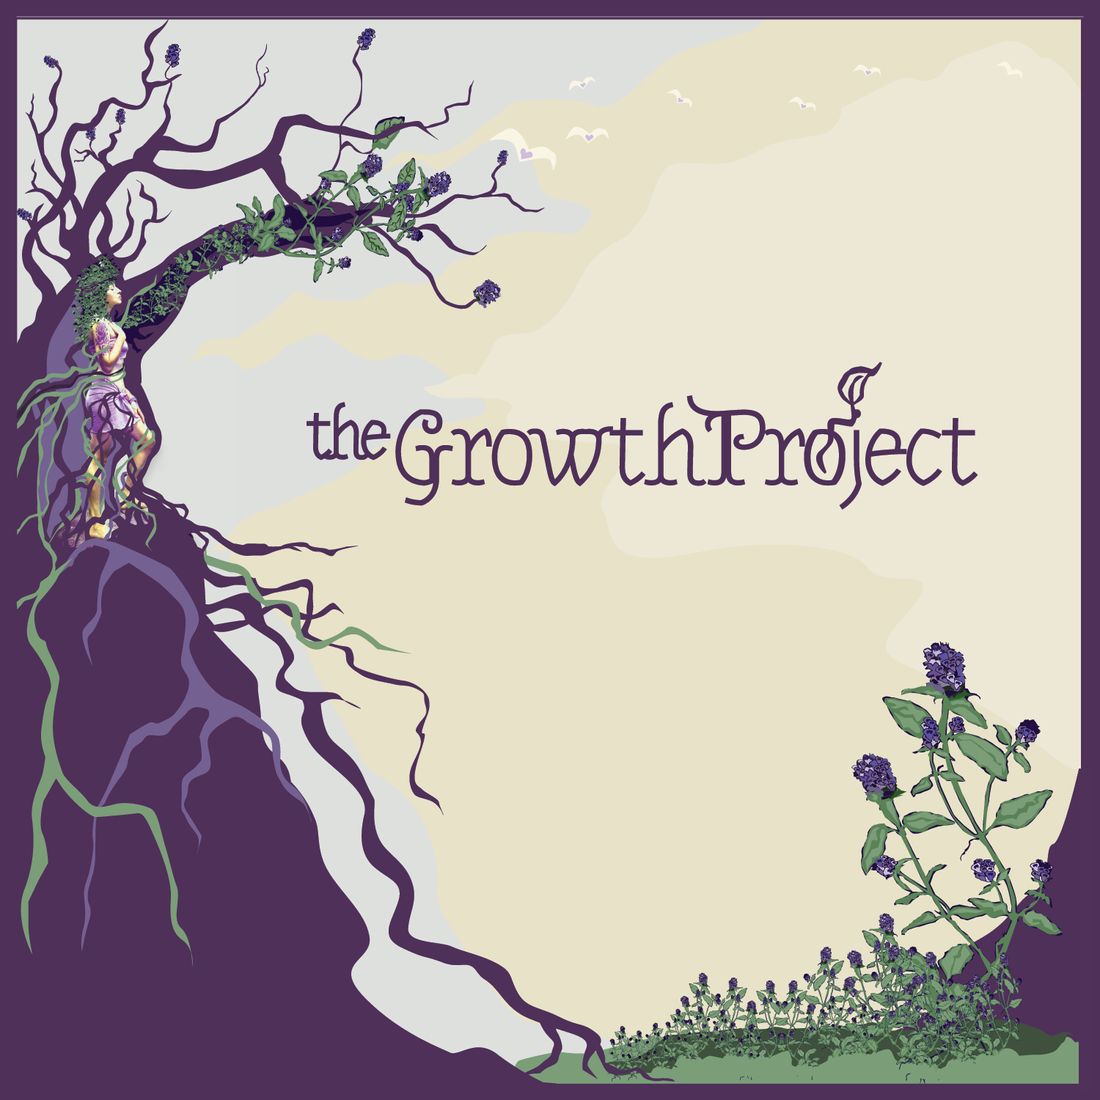 Discover the summarized story of Maia, (a woman who is a Dryad at heart, recovering from a past of abuse) also known as "Tugg Heartstrings" from the #GrowthProject, as you click through the slideshow.
